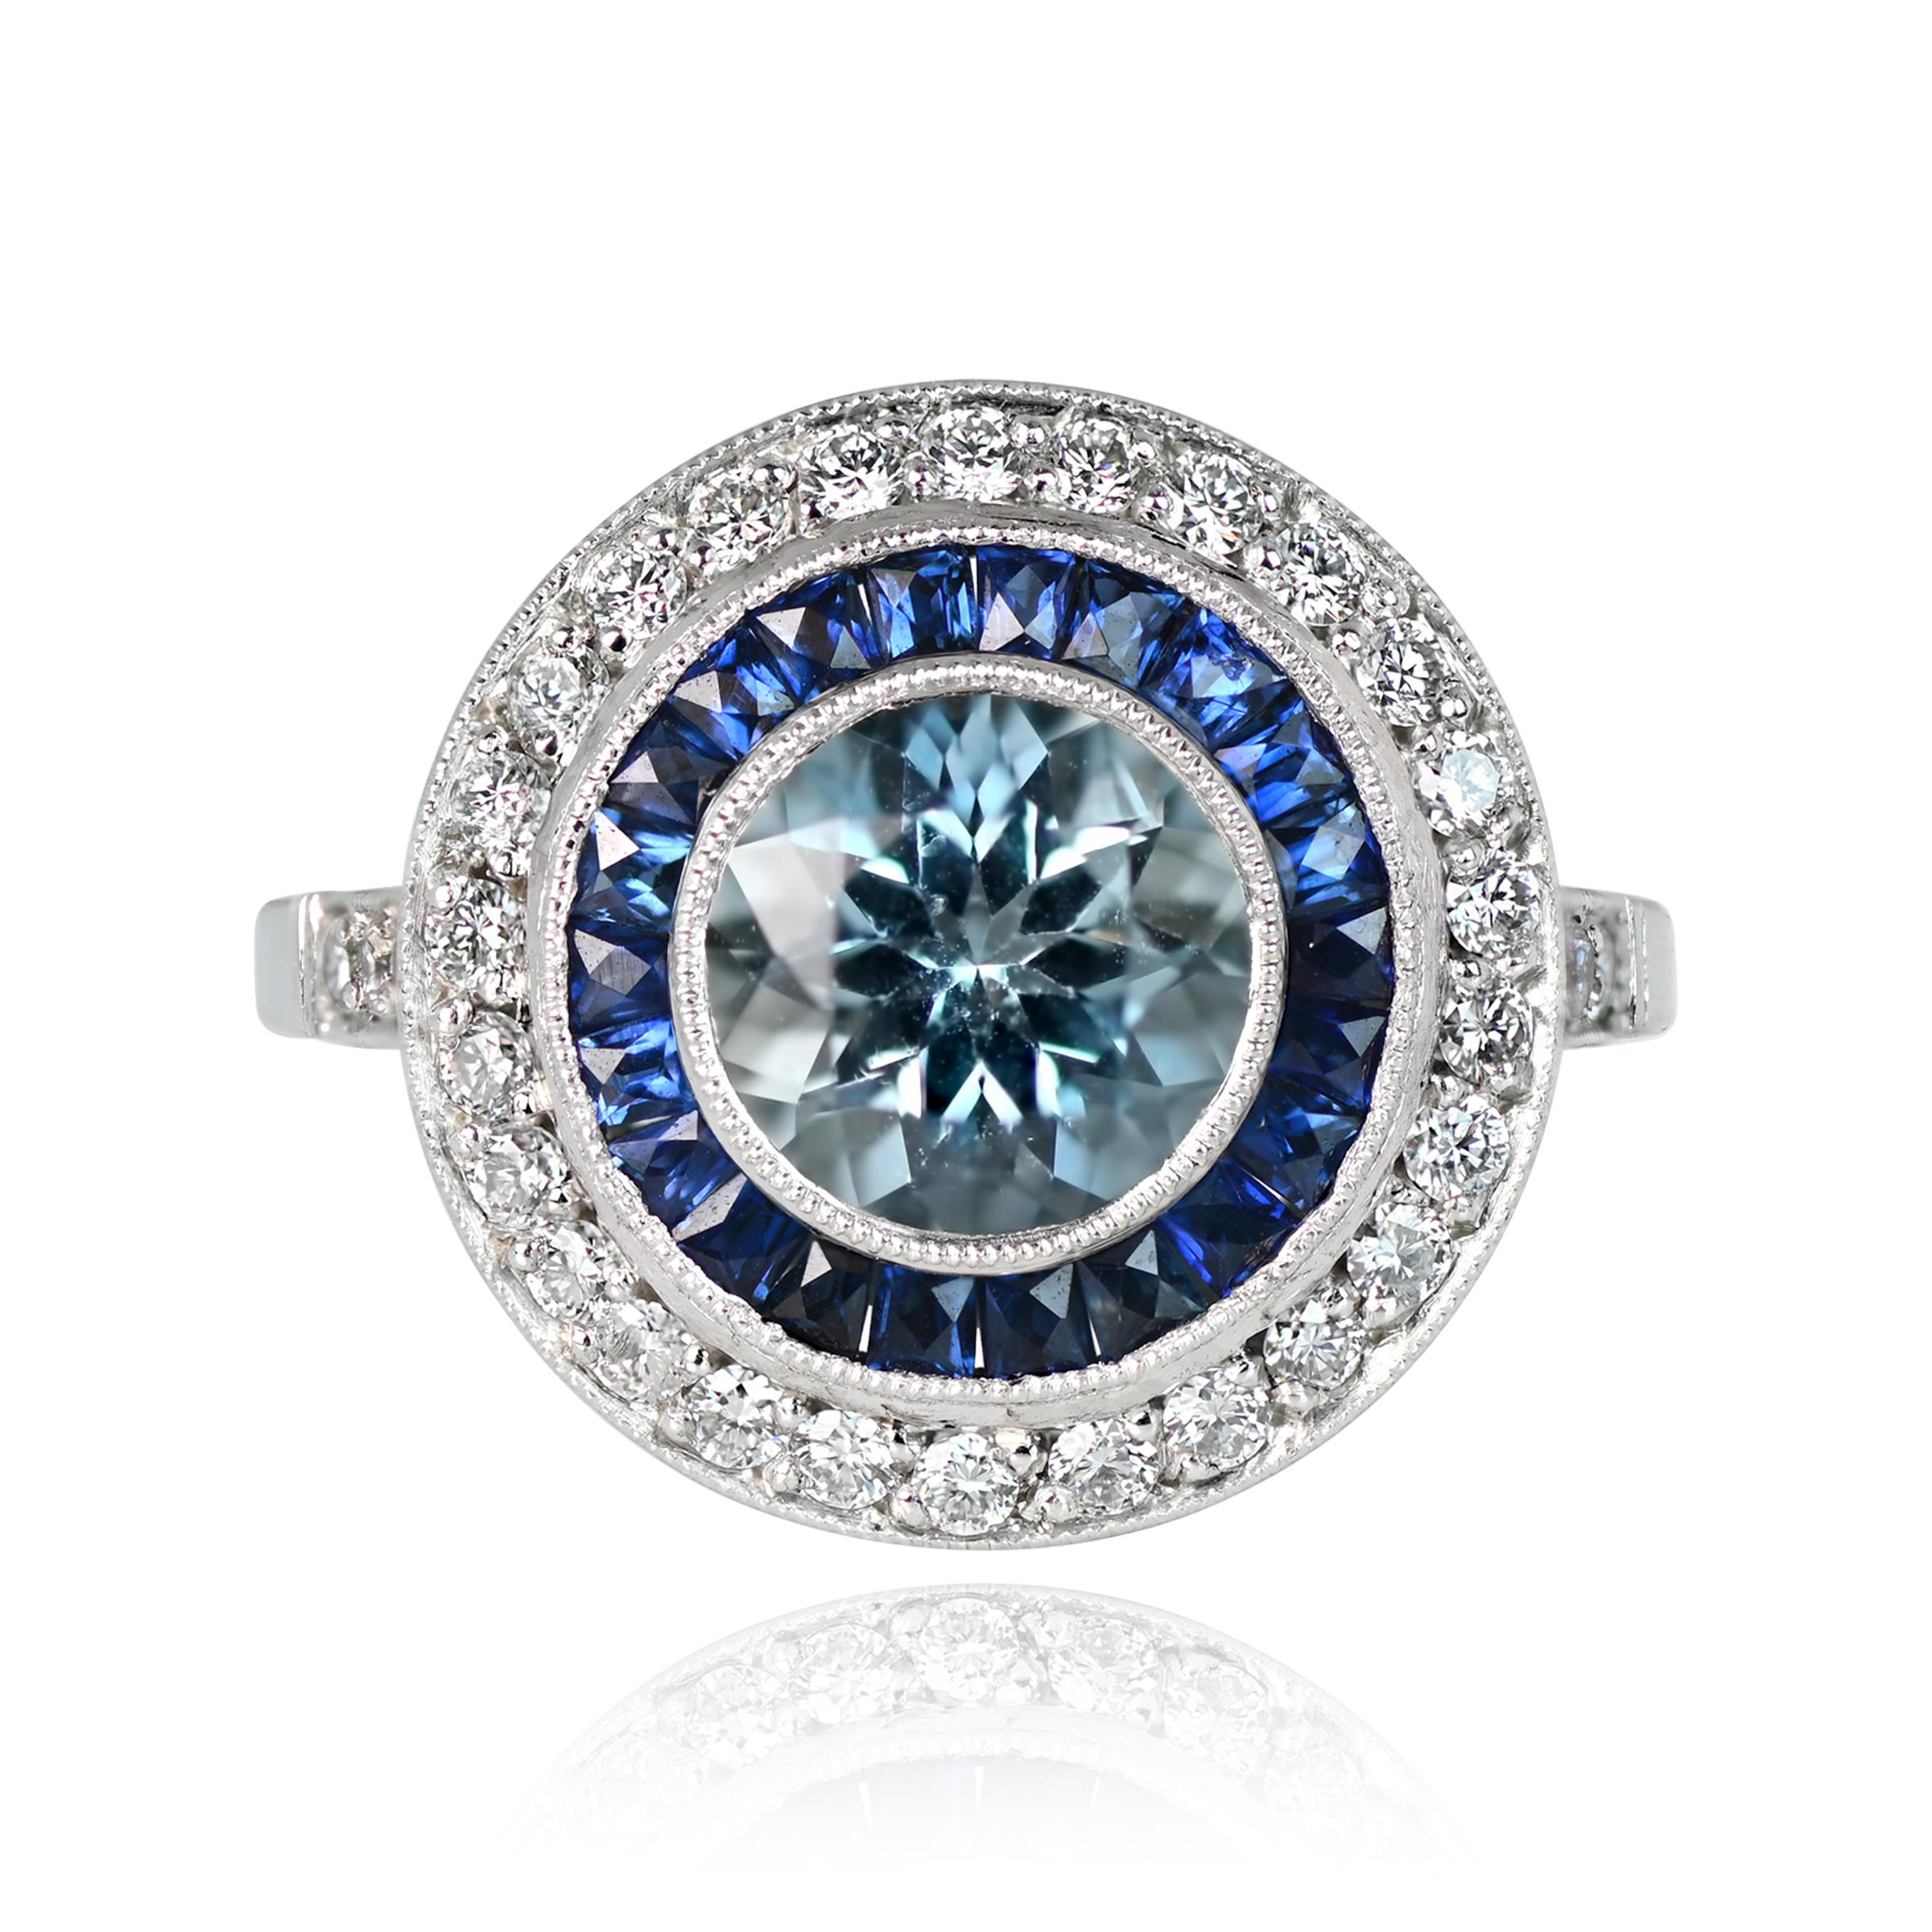 This exquisite ring showcases a vibrant 1.00-carat aquamarine with a lively teal saturation. It is encircled by a double row of calibrated French-cut sapphires and a halo of old European-cut diamonds. Meticulously hand-crafted in platinum.


Ring